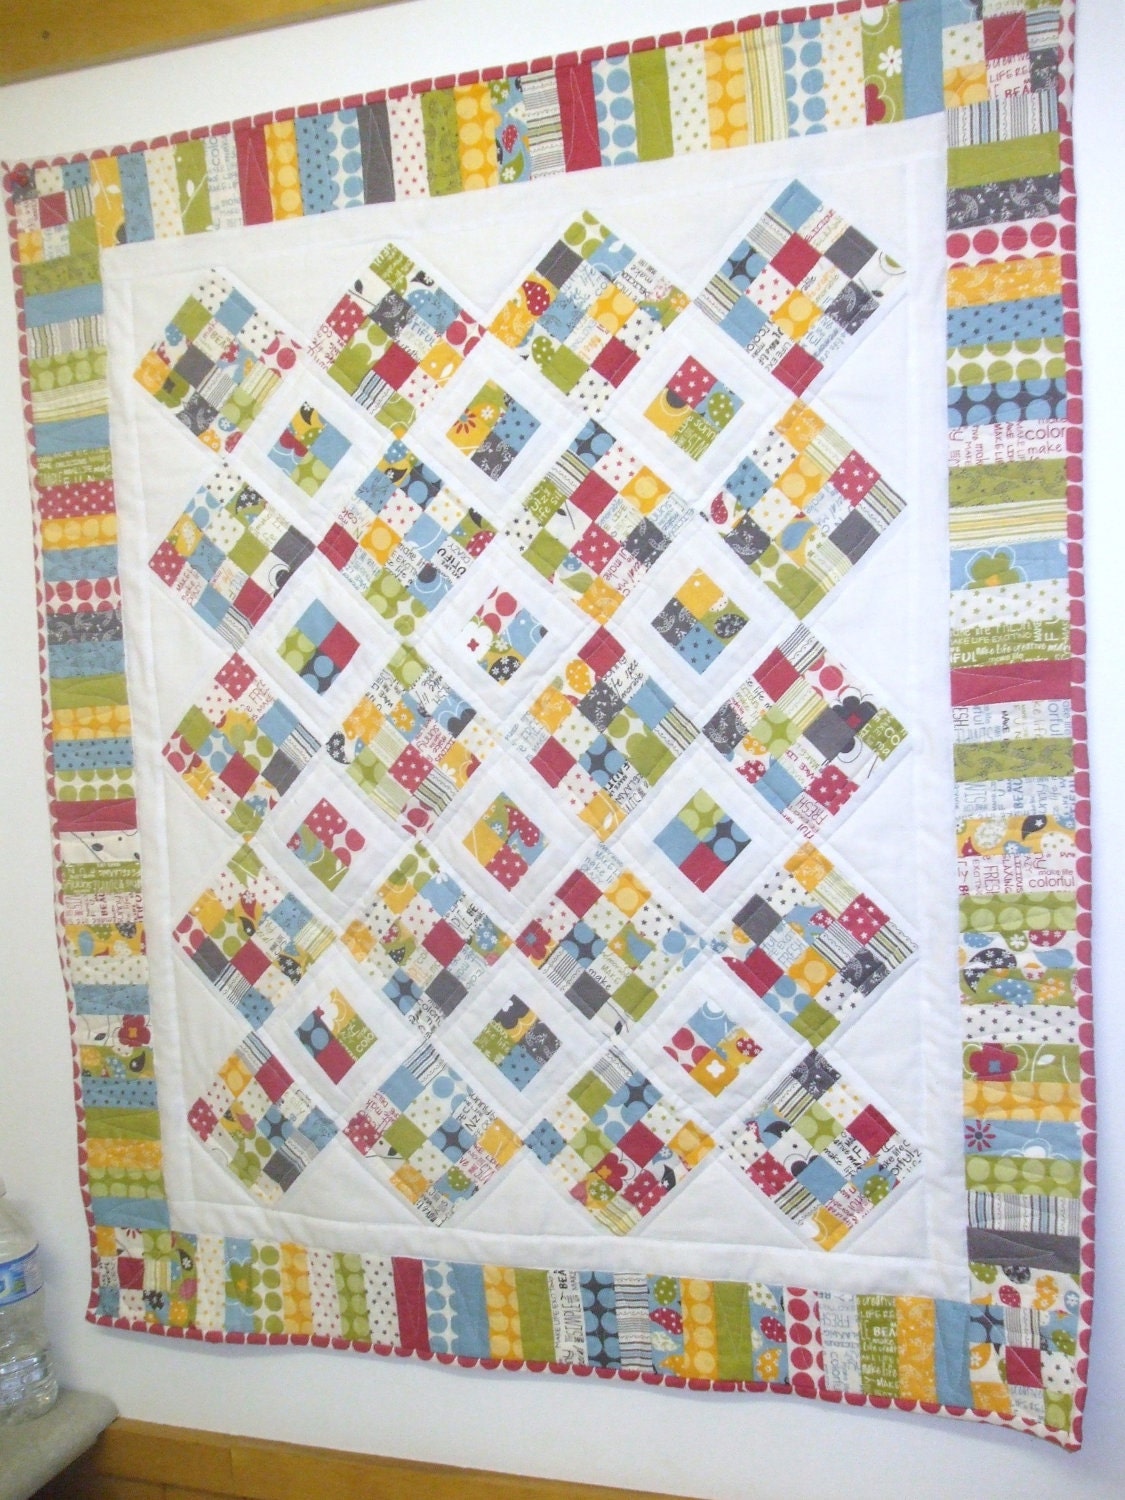 SALE - Baby Quilt - "Between Charming Friends Quilt"